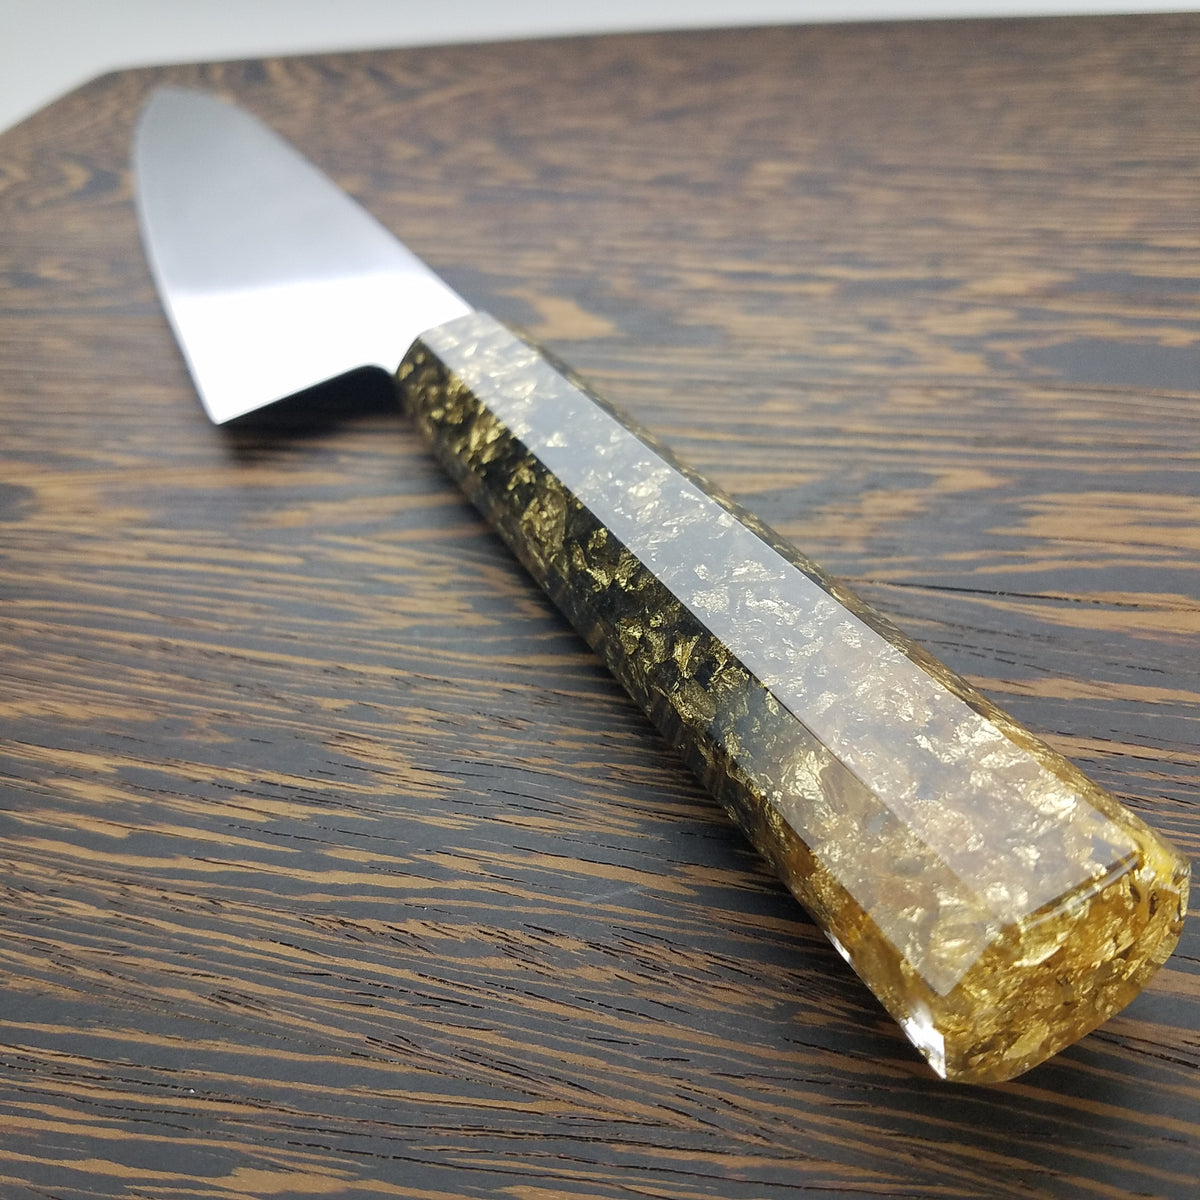 Black Gold - 240mm (9.45in) Gyuto Chef Knife Stainless Steel